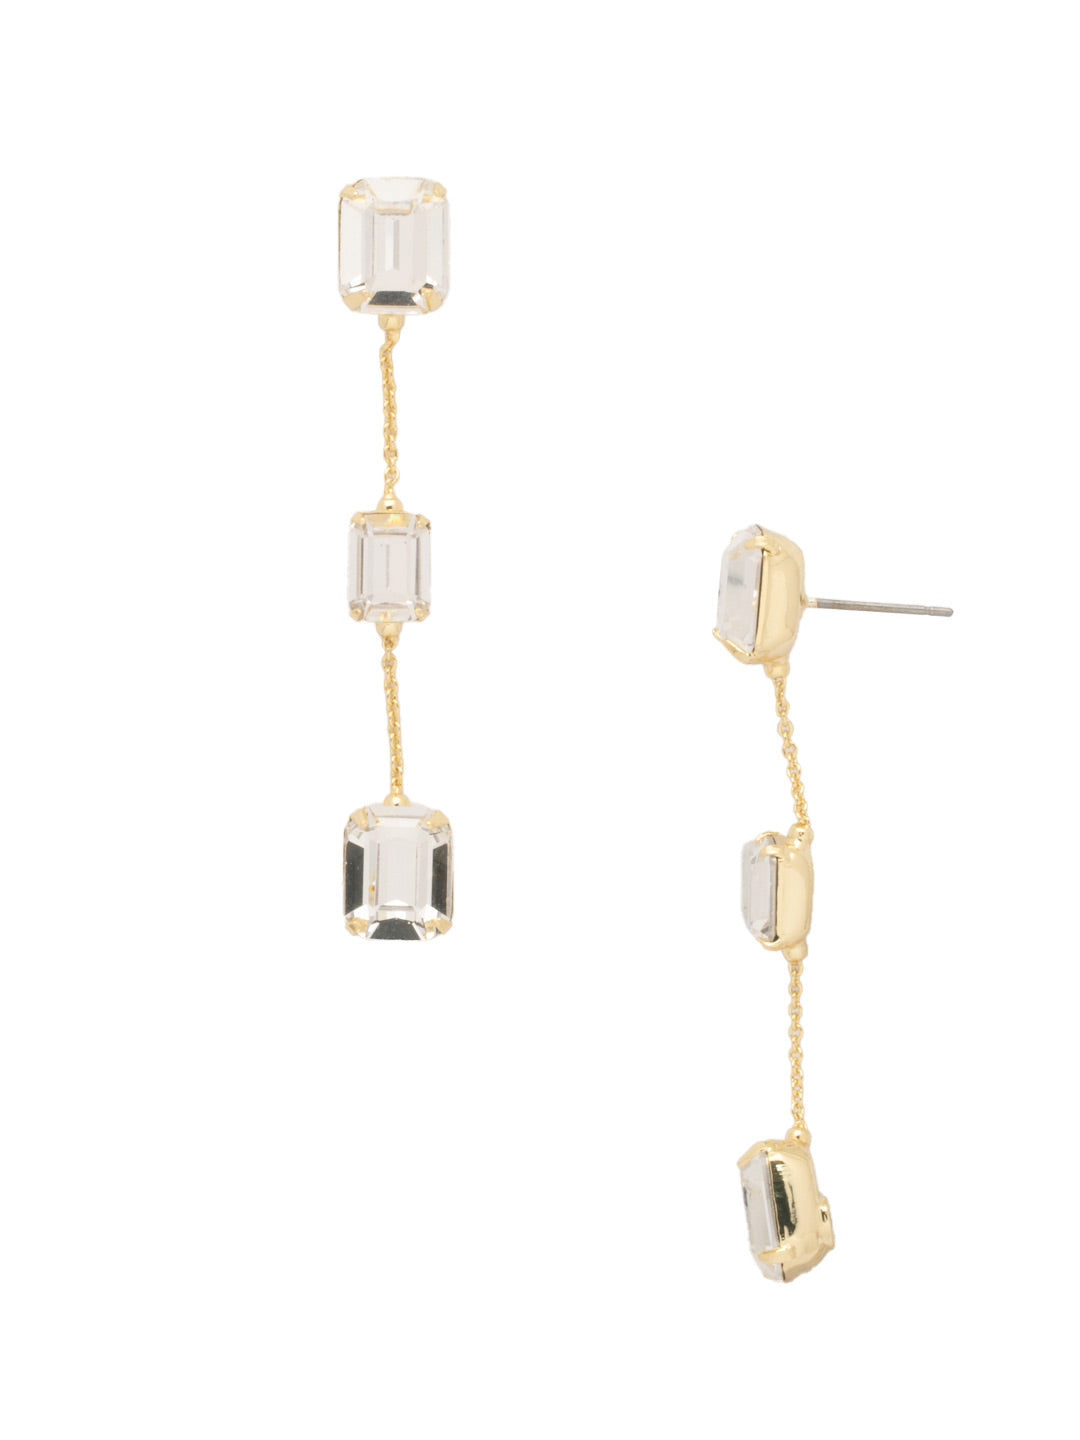 Emerald Cut Triple Dangle Earrings - EFL15BGCRY - <p>The Emerald Cut Triple Dangle Earrings feature three emerald cut crystals dangling from a post. From Sorrelli's Crystal collection in our Bright Gold-tone finish.</p>